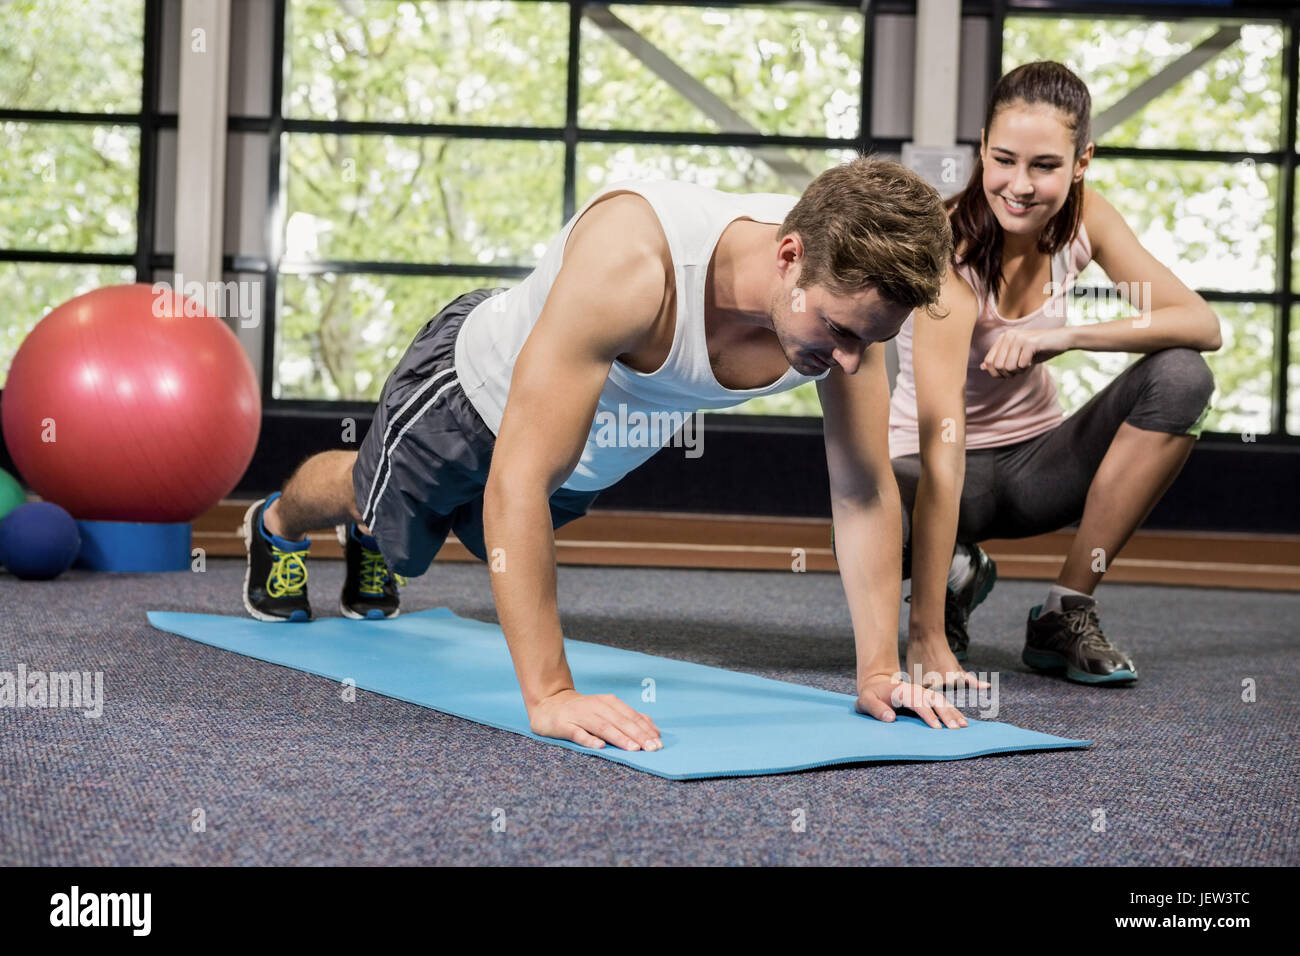 Trainer assisting man with push ups Stock Photo